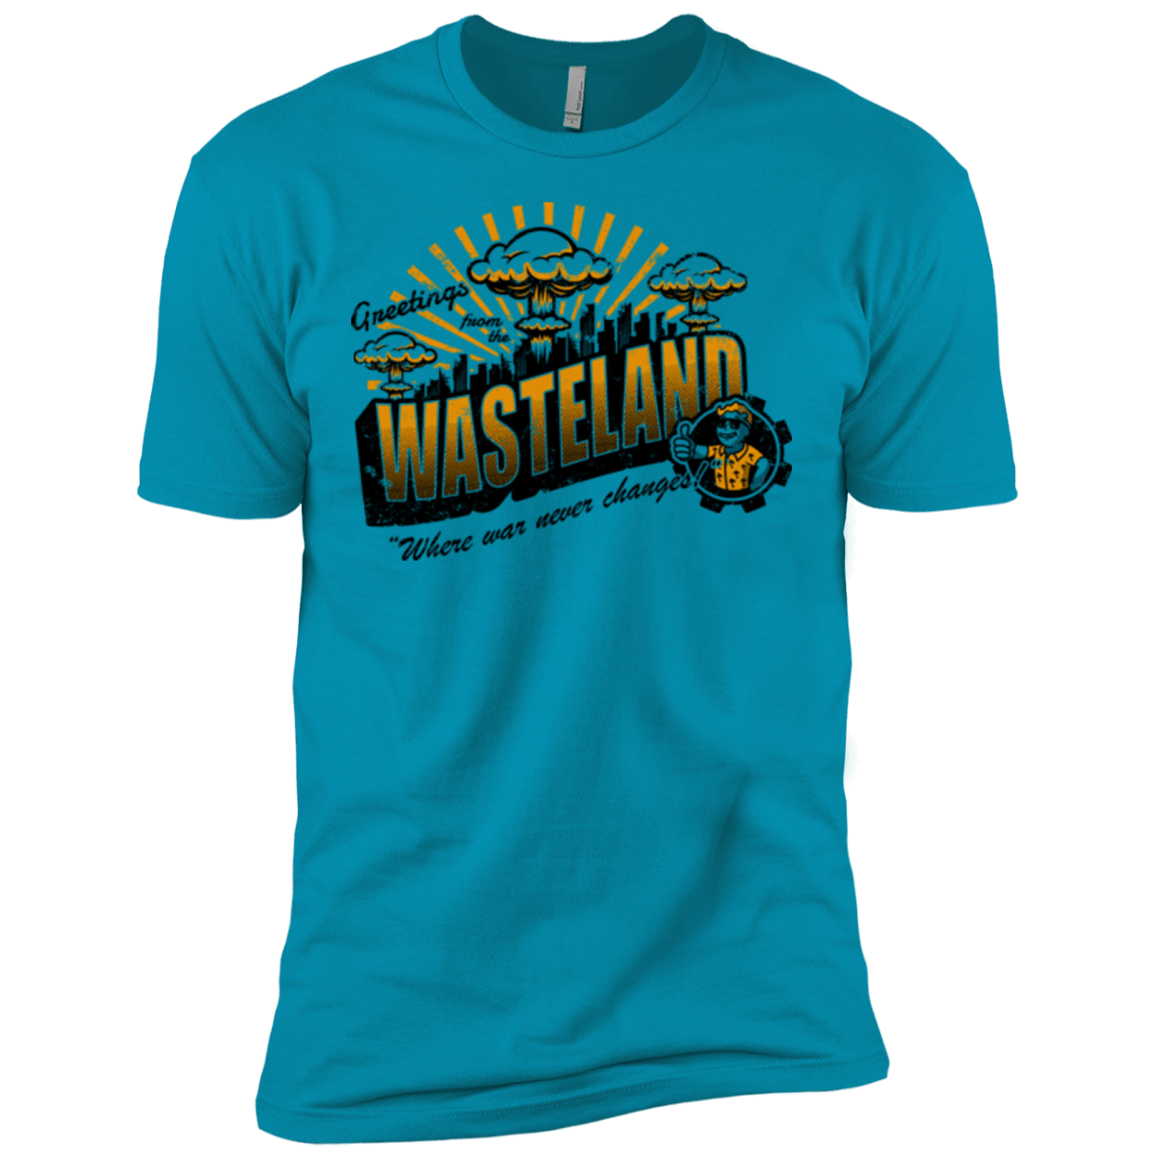 Greetings from the Wasteland! Men's Premium T-Shirt